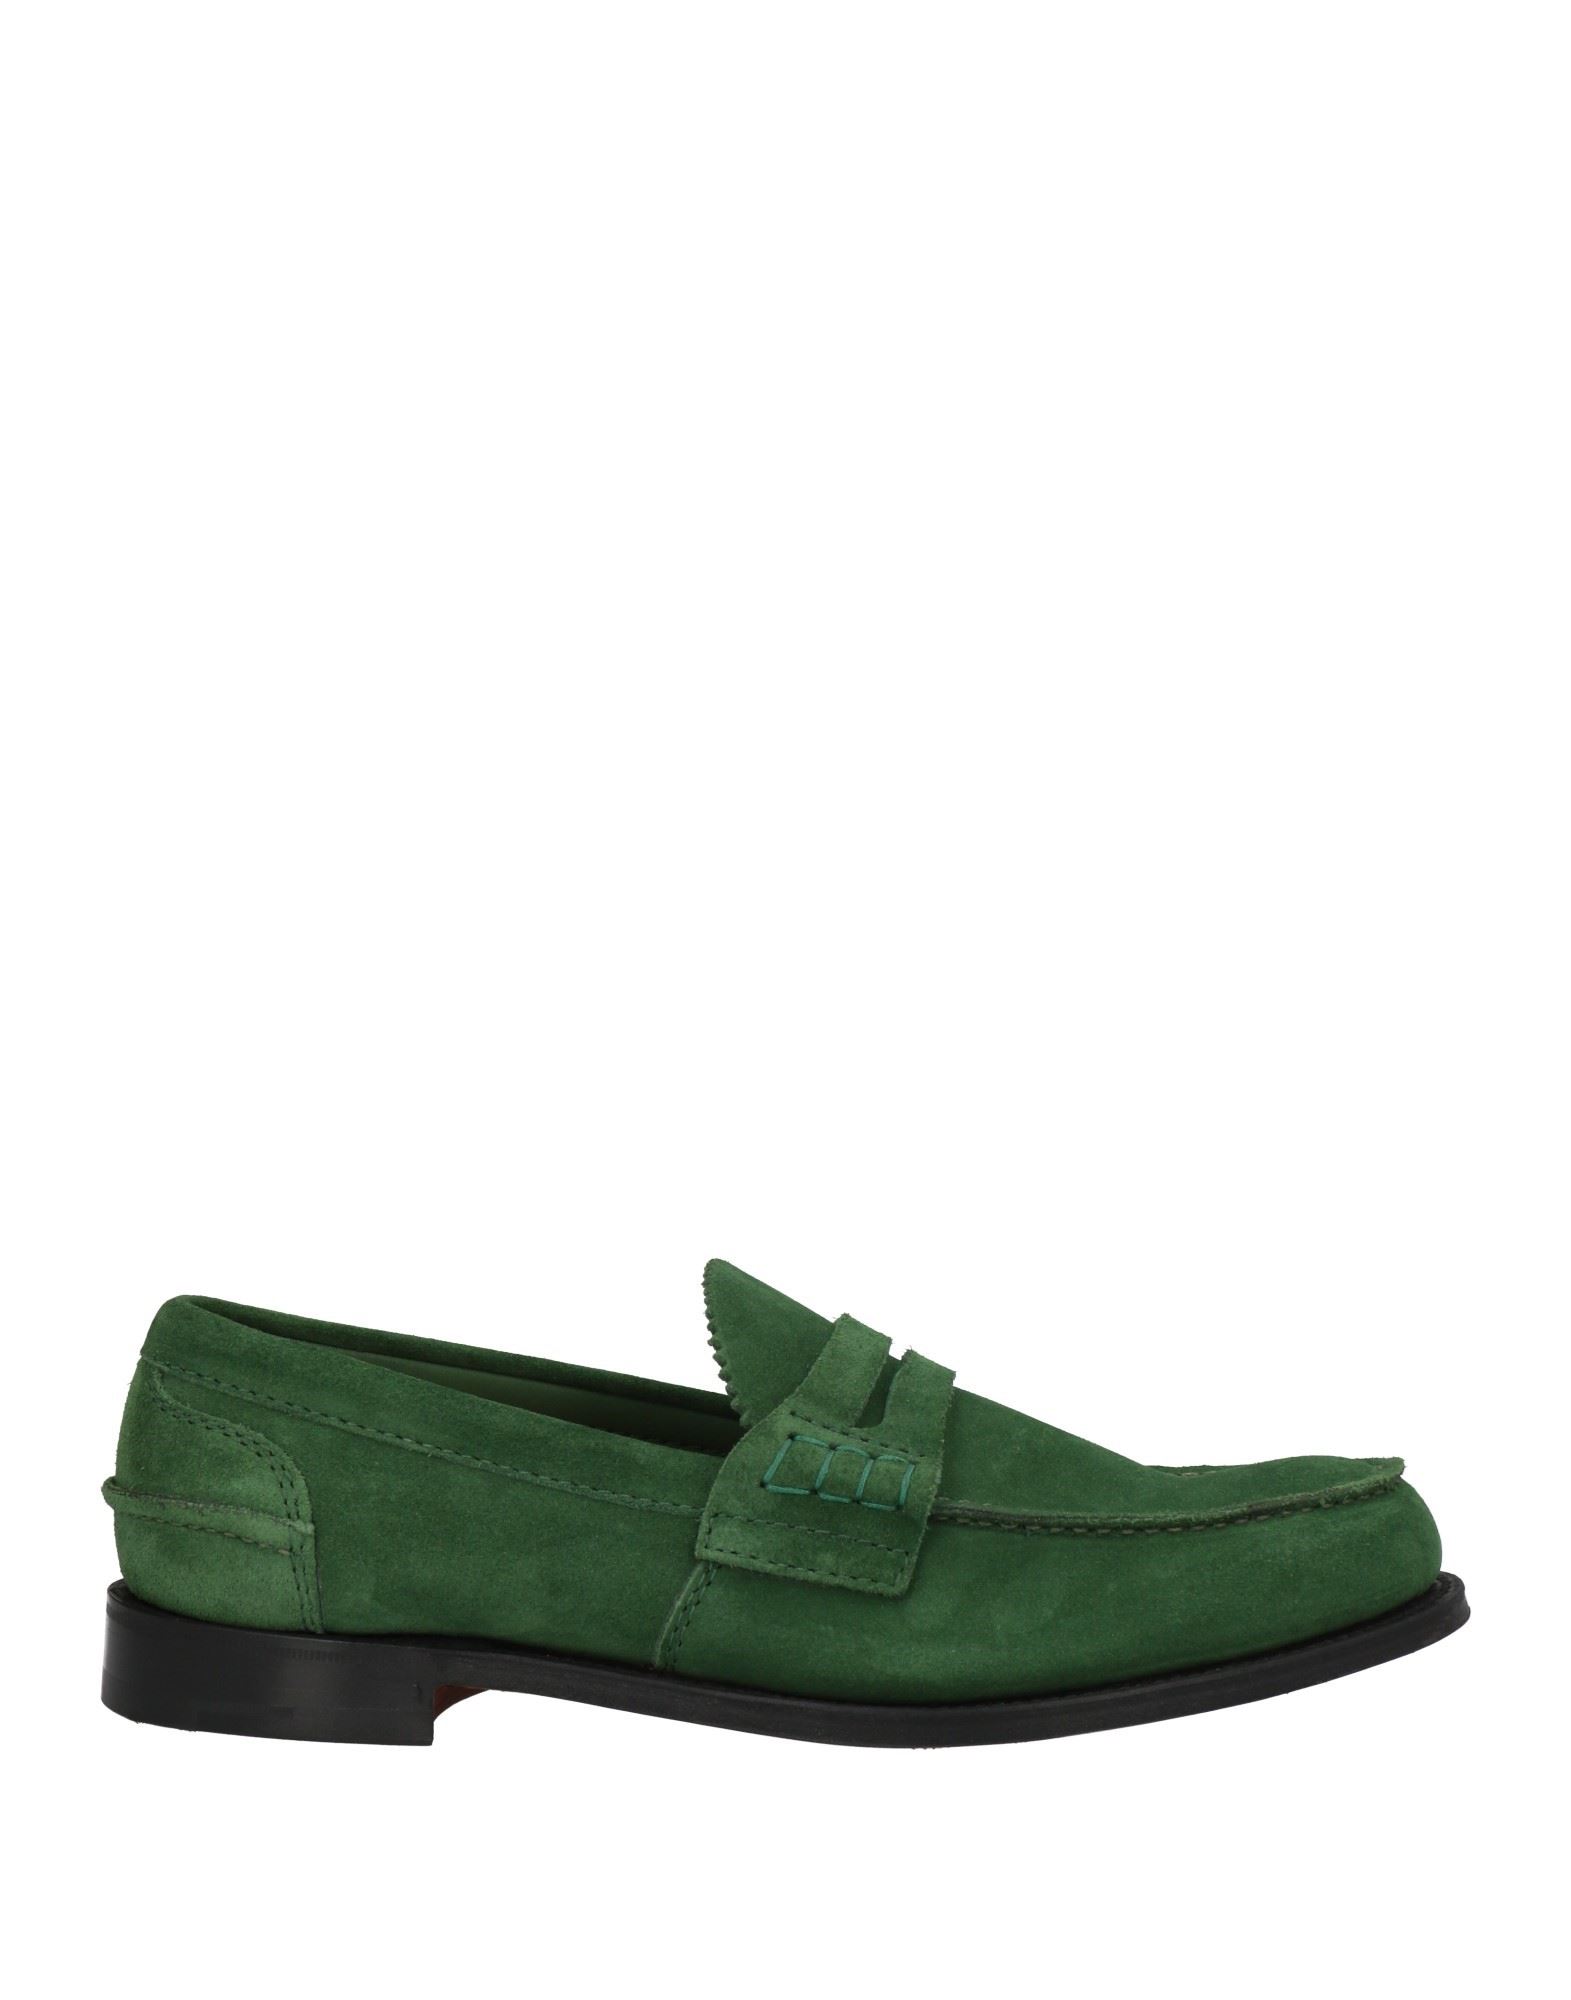 Church's Man Loafers Green Size 7.5 Soft Leather